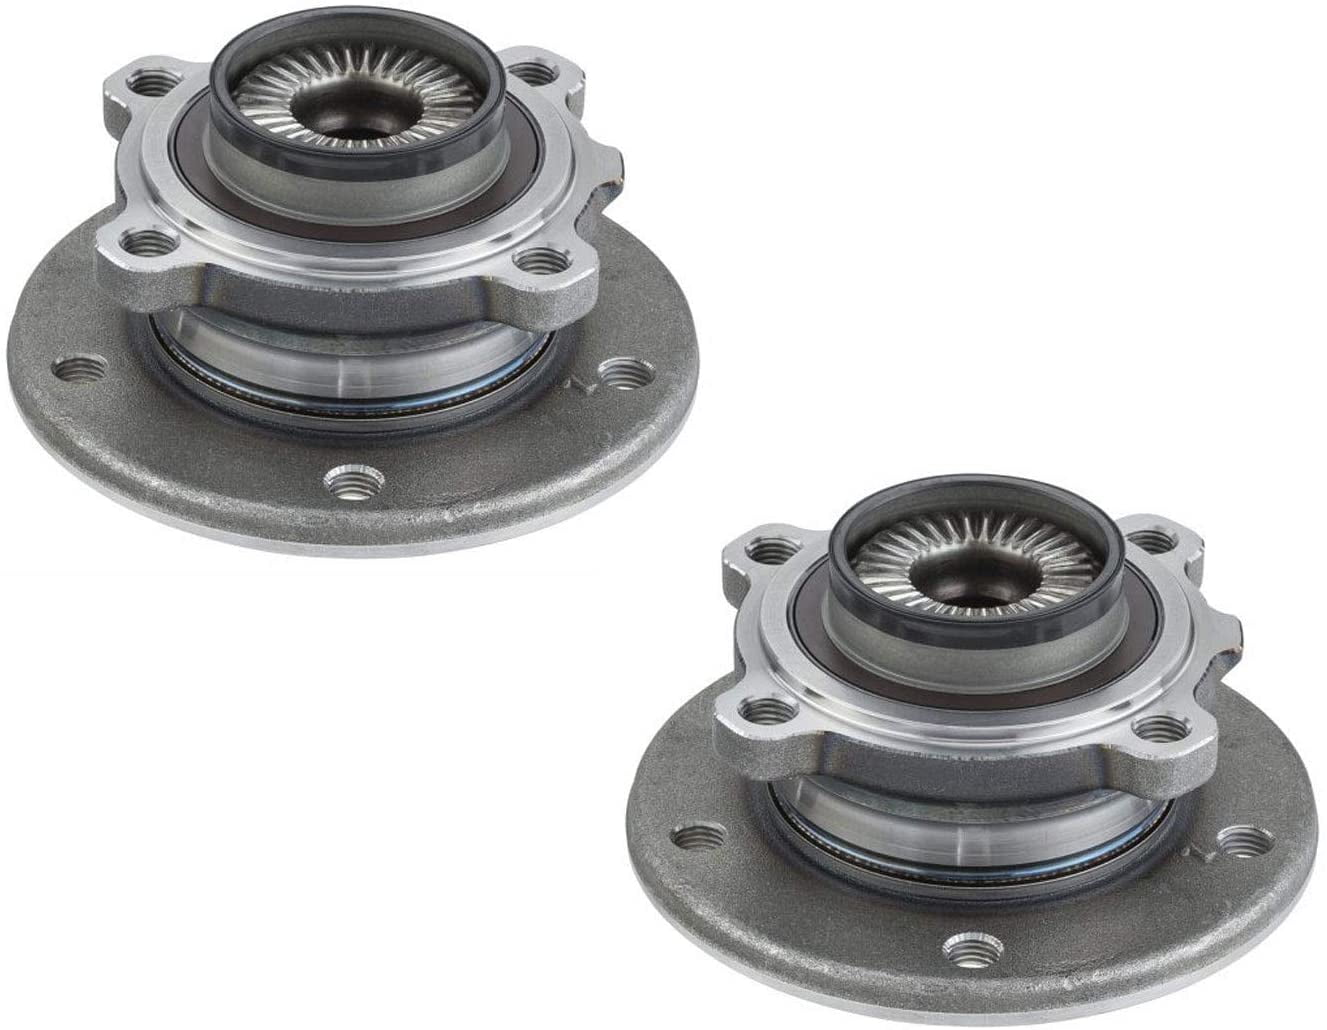 Pair:2 New Front Left and Right Wheel Hub & Bearings for 2012-2015 BMW X1 